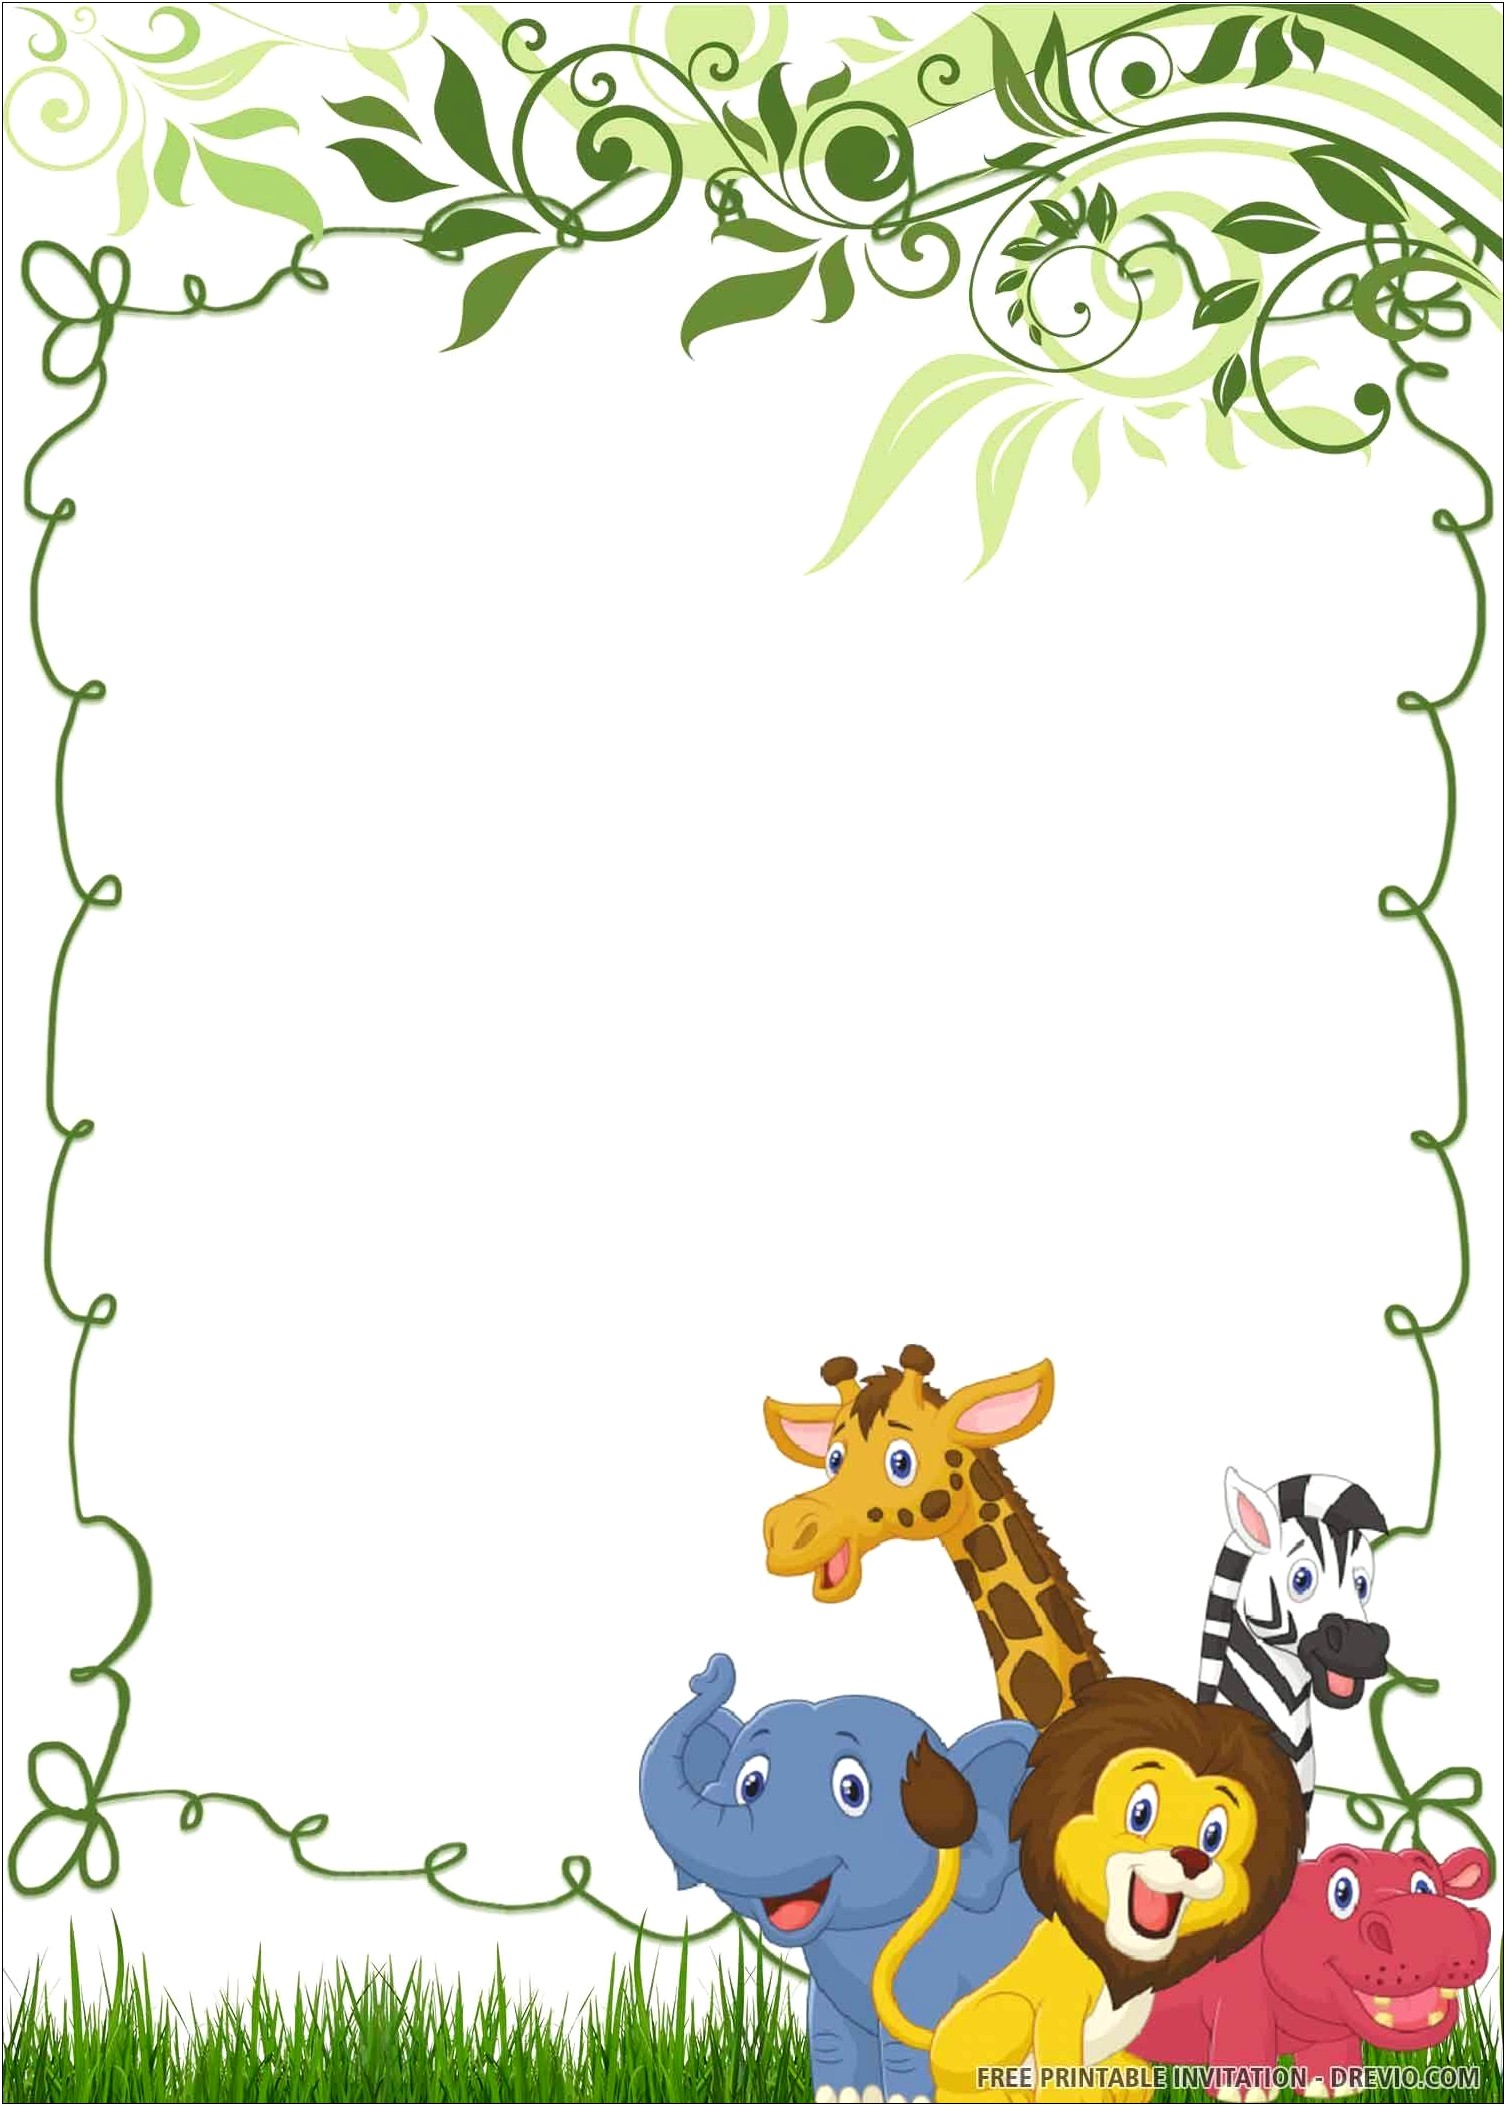 Free Jungle Theme Party Invitation Templates - Resume Example Gallery